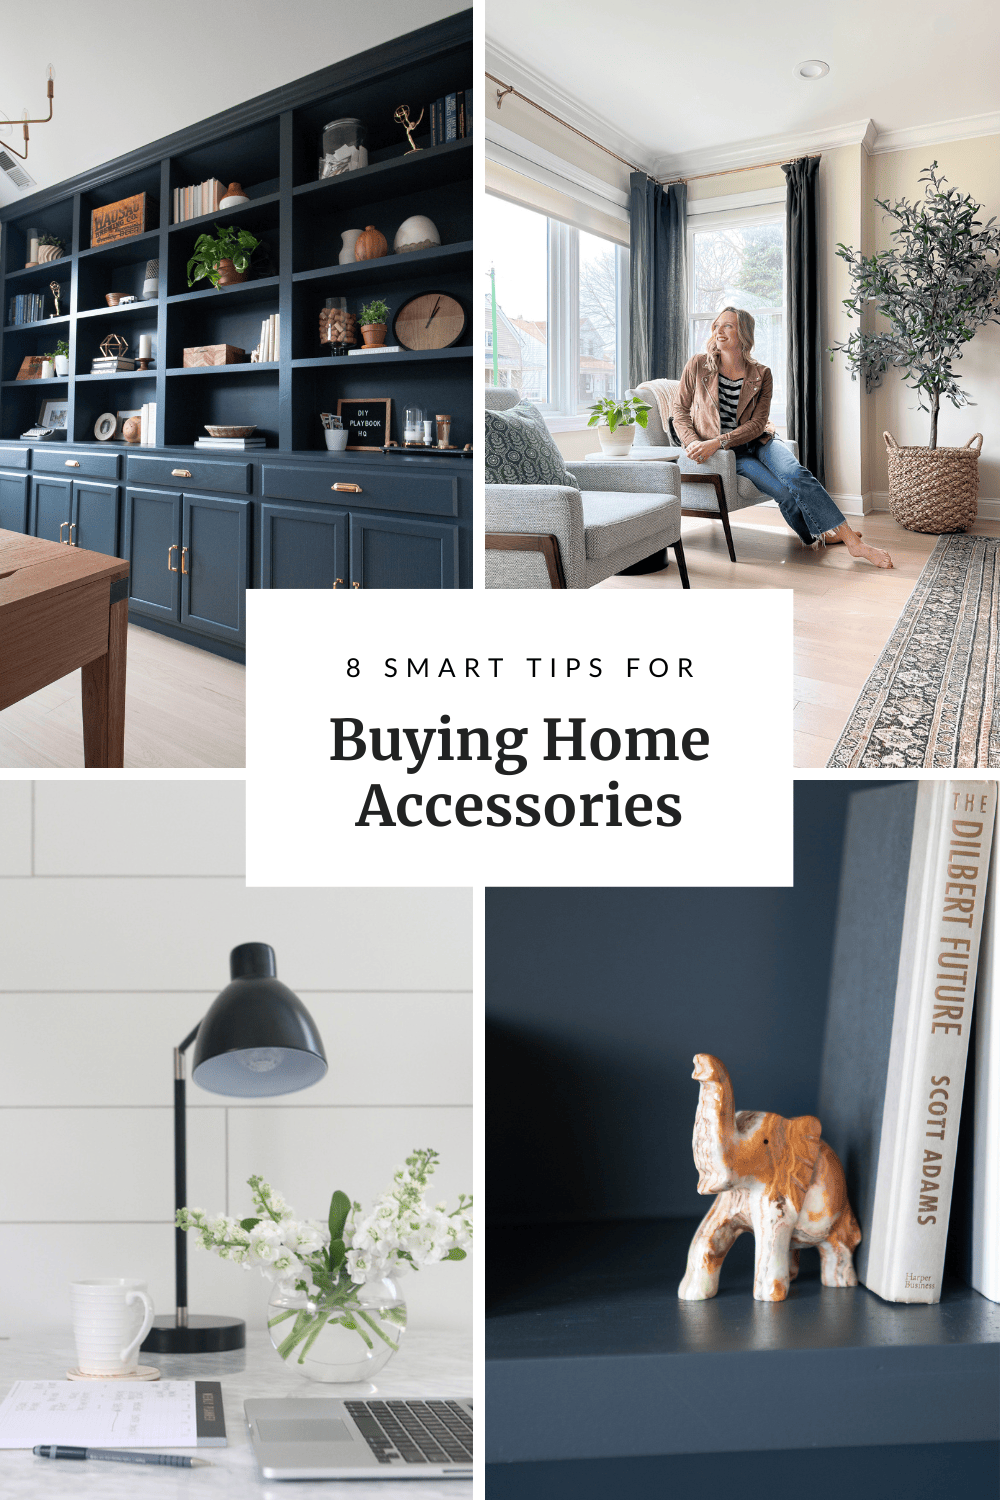 My best tips for buying home accessories